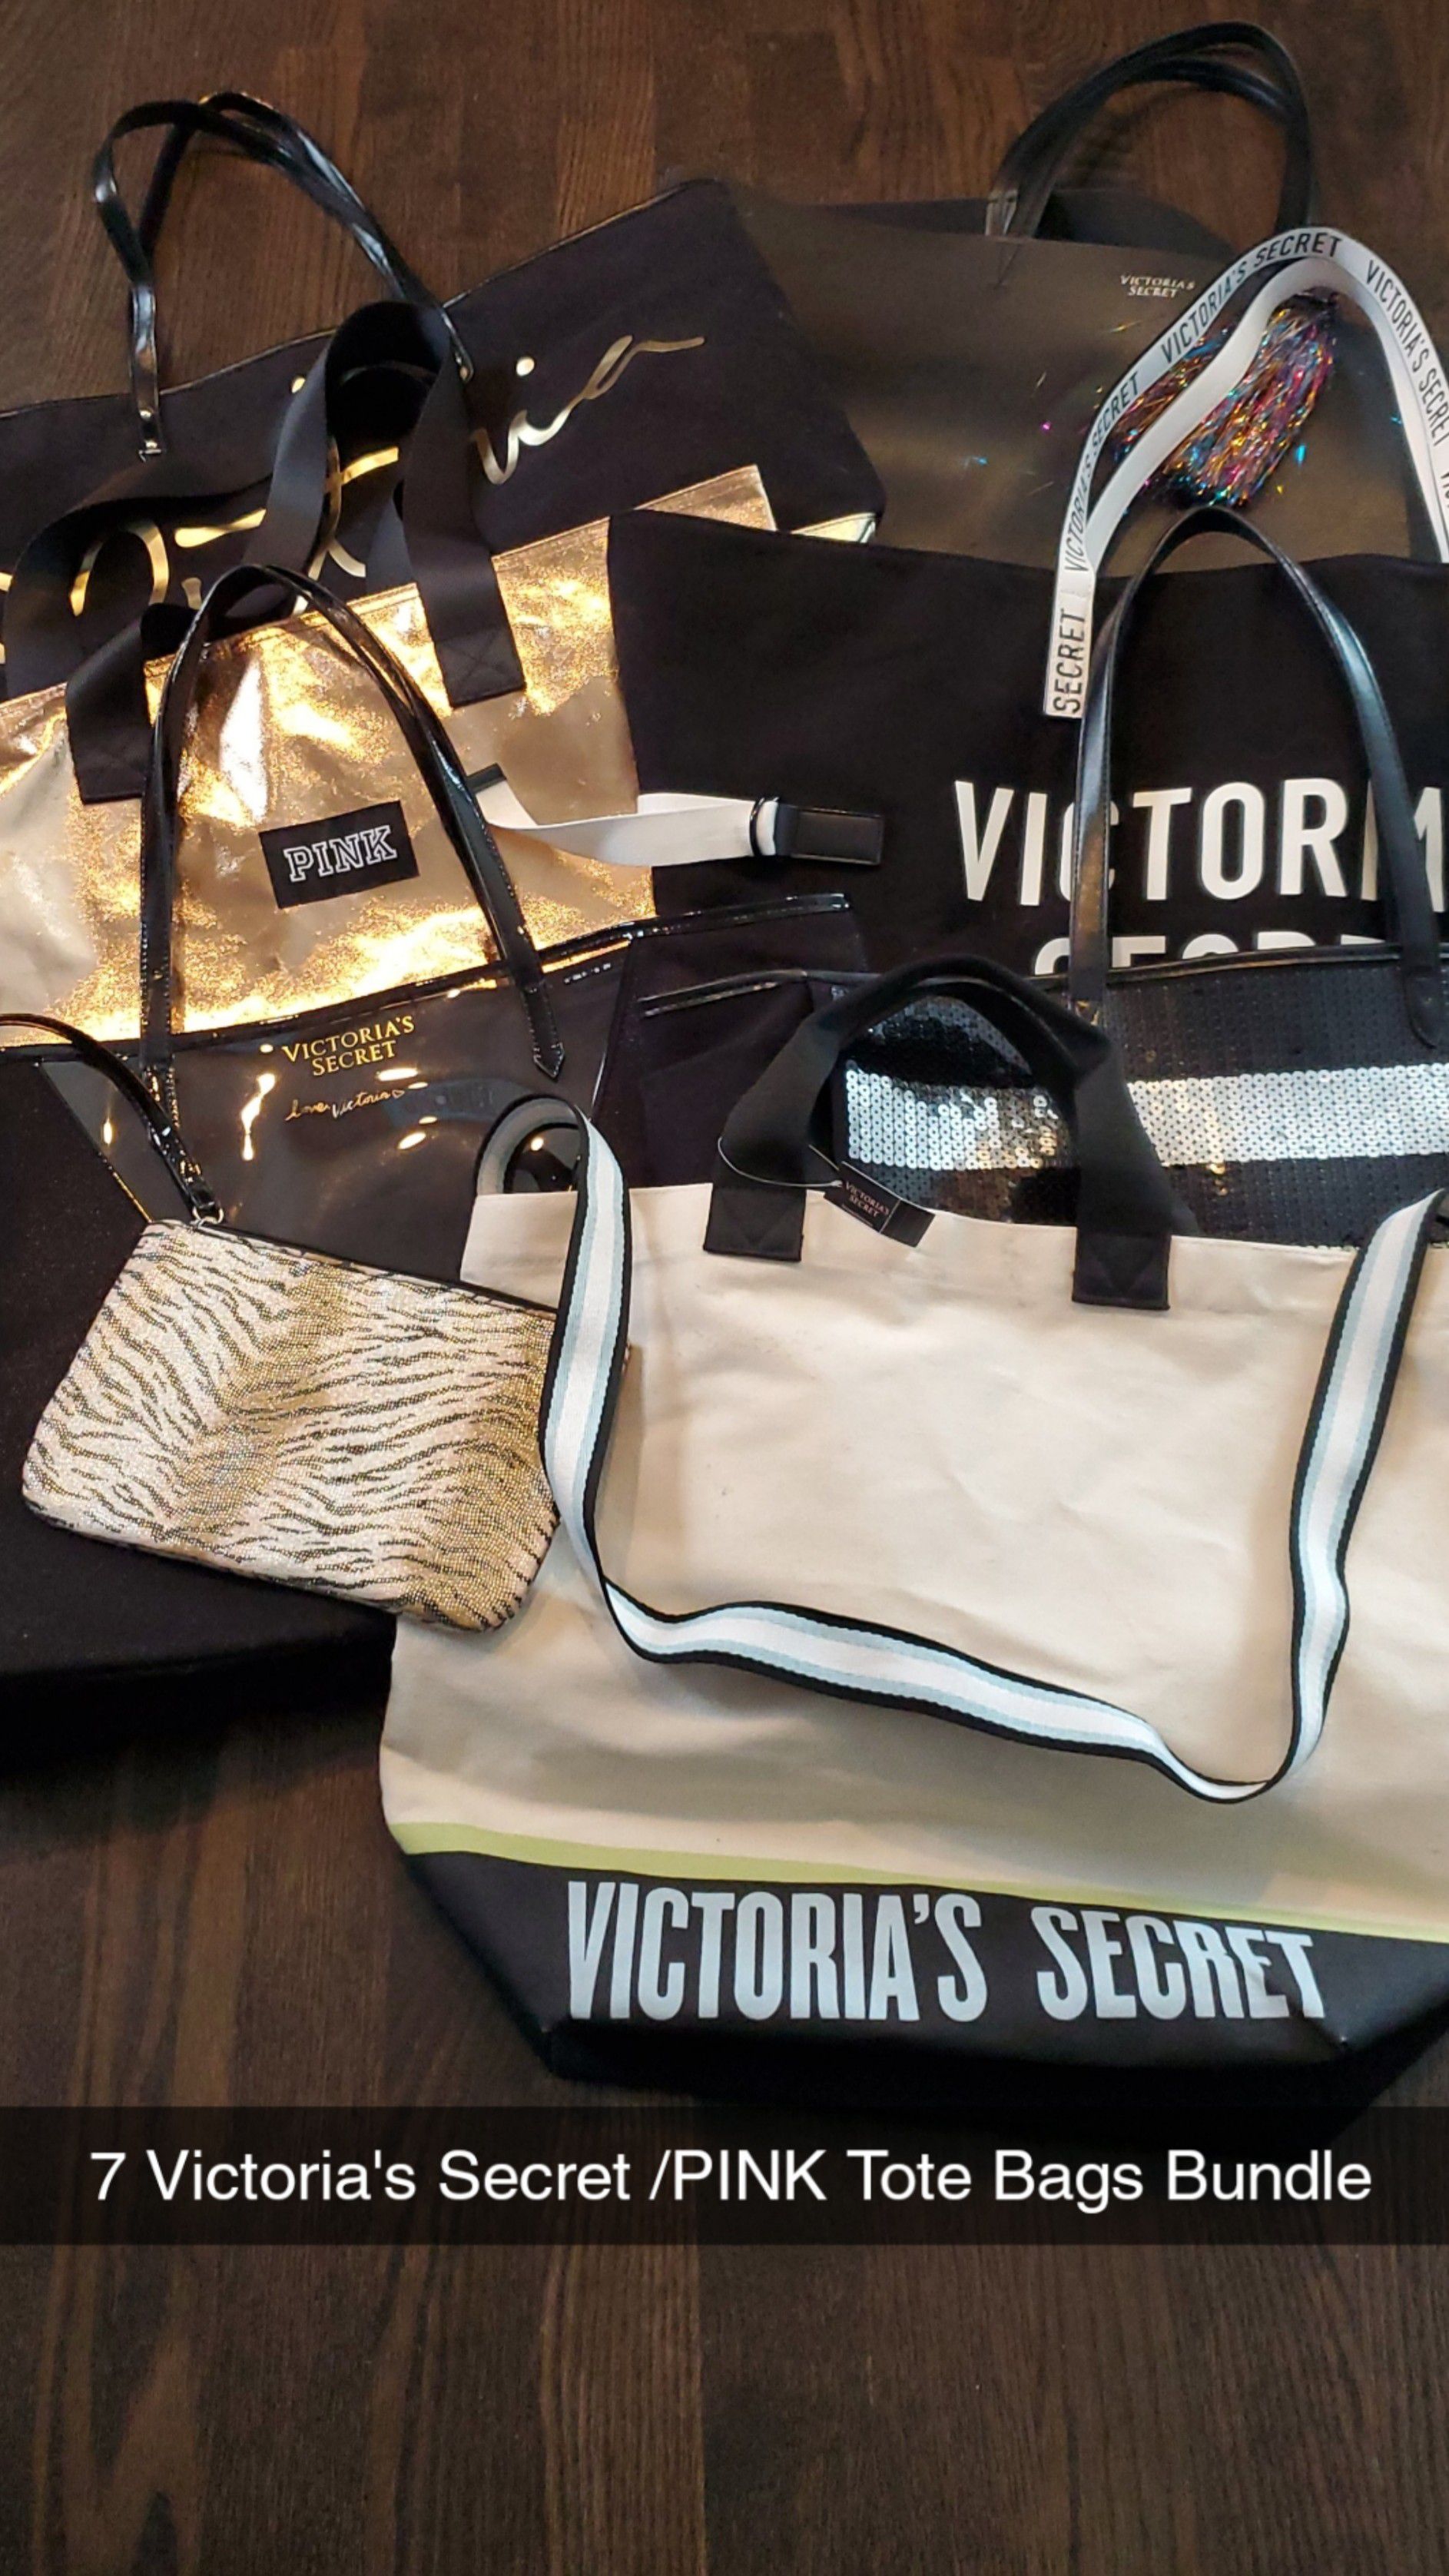 7 Victoria's Secret /PINK Tote Bags - Naperville Pick up Only